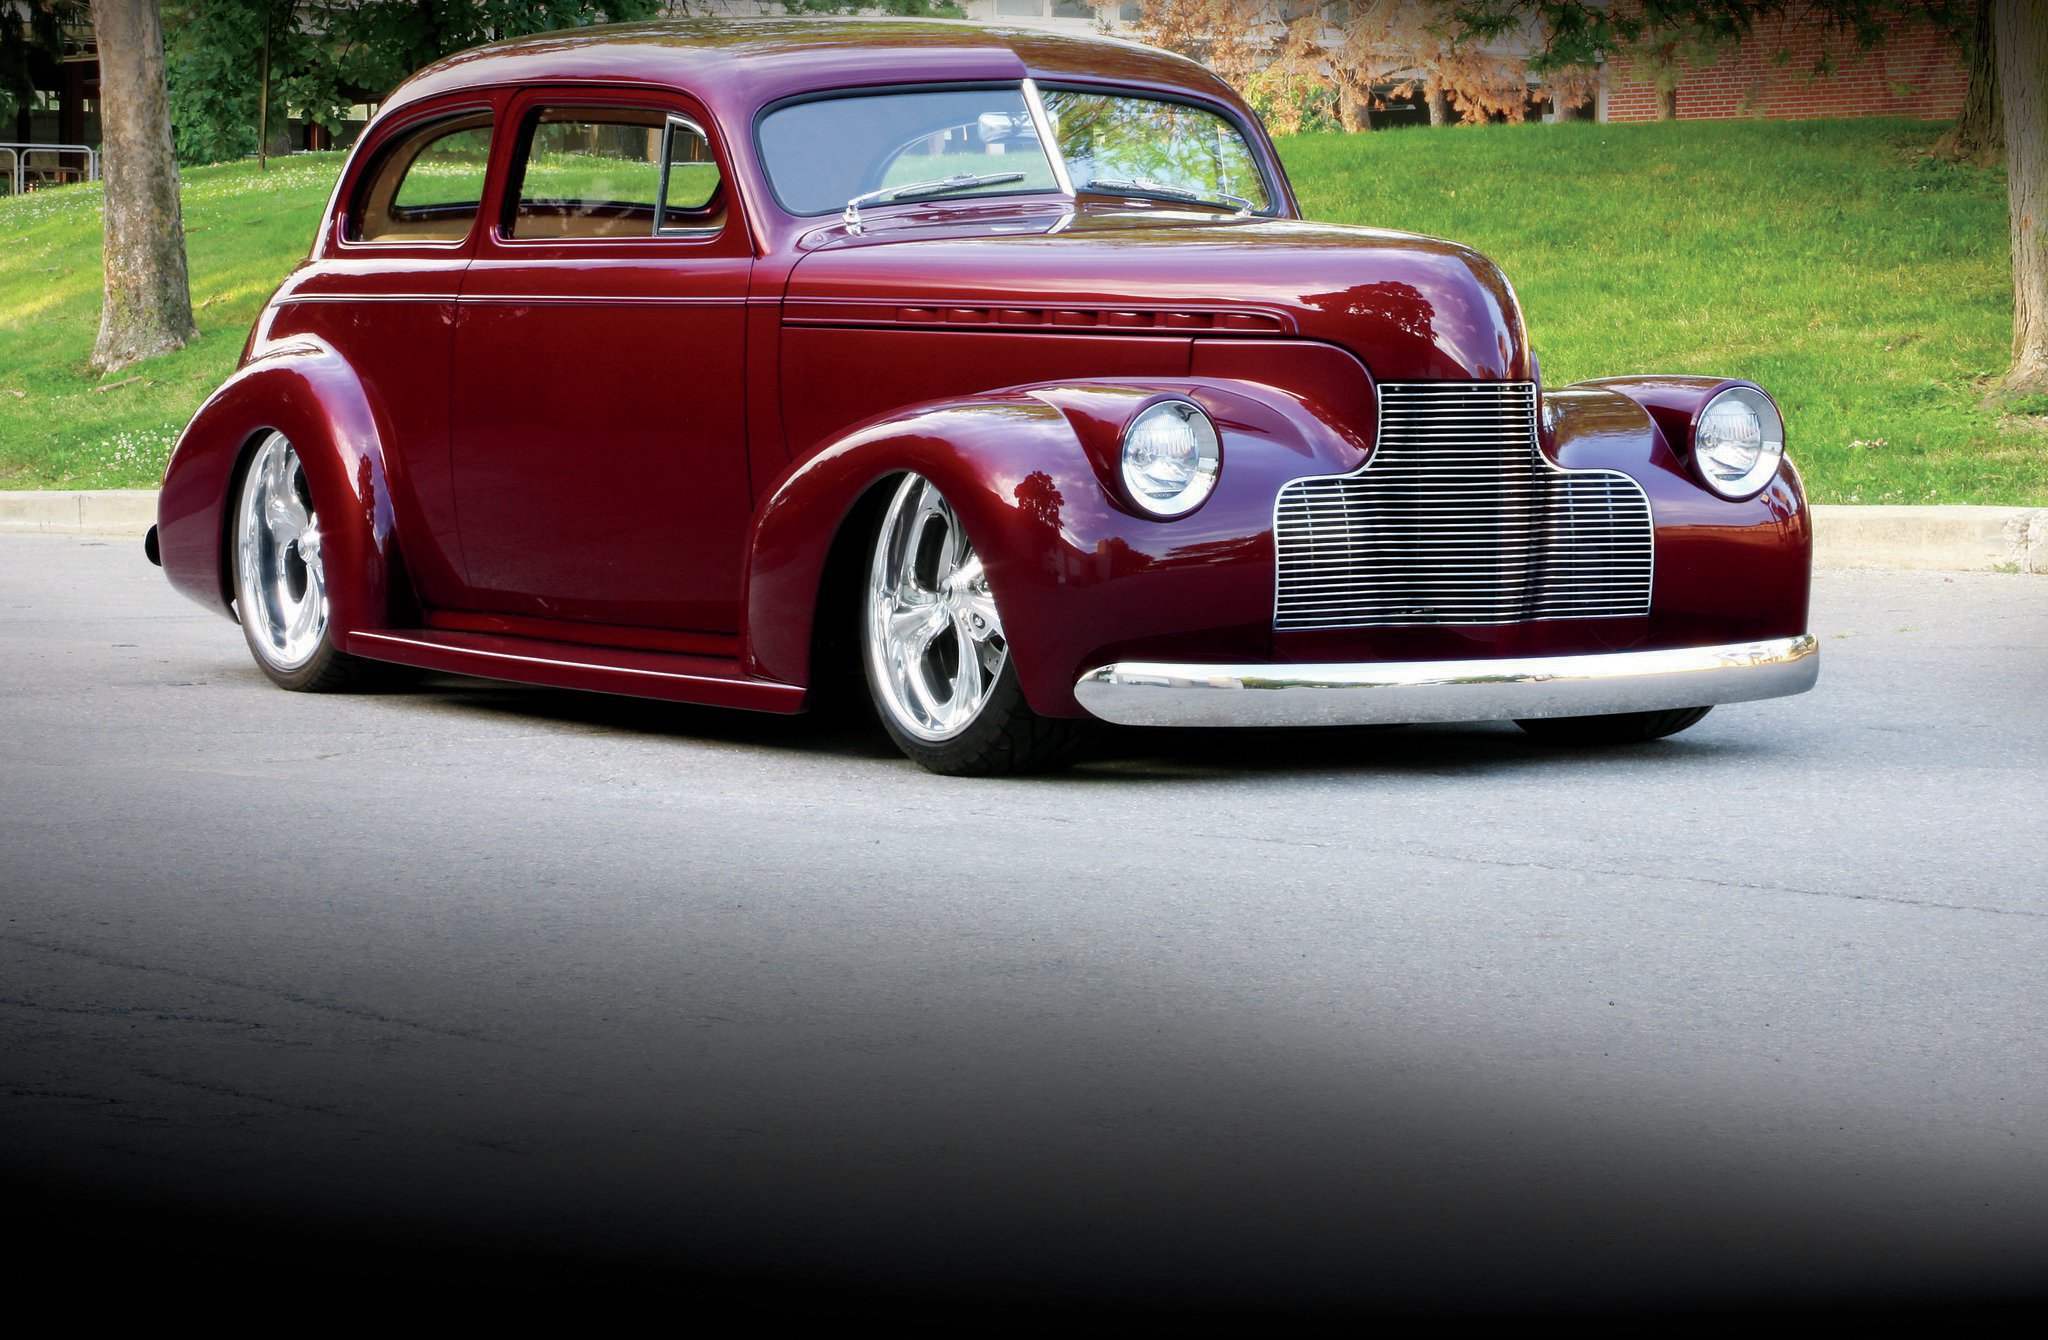 Nice Images Collection: 1940 Chevrolet Desktop Wallpapers